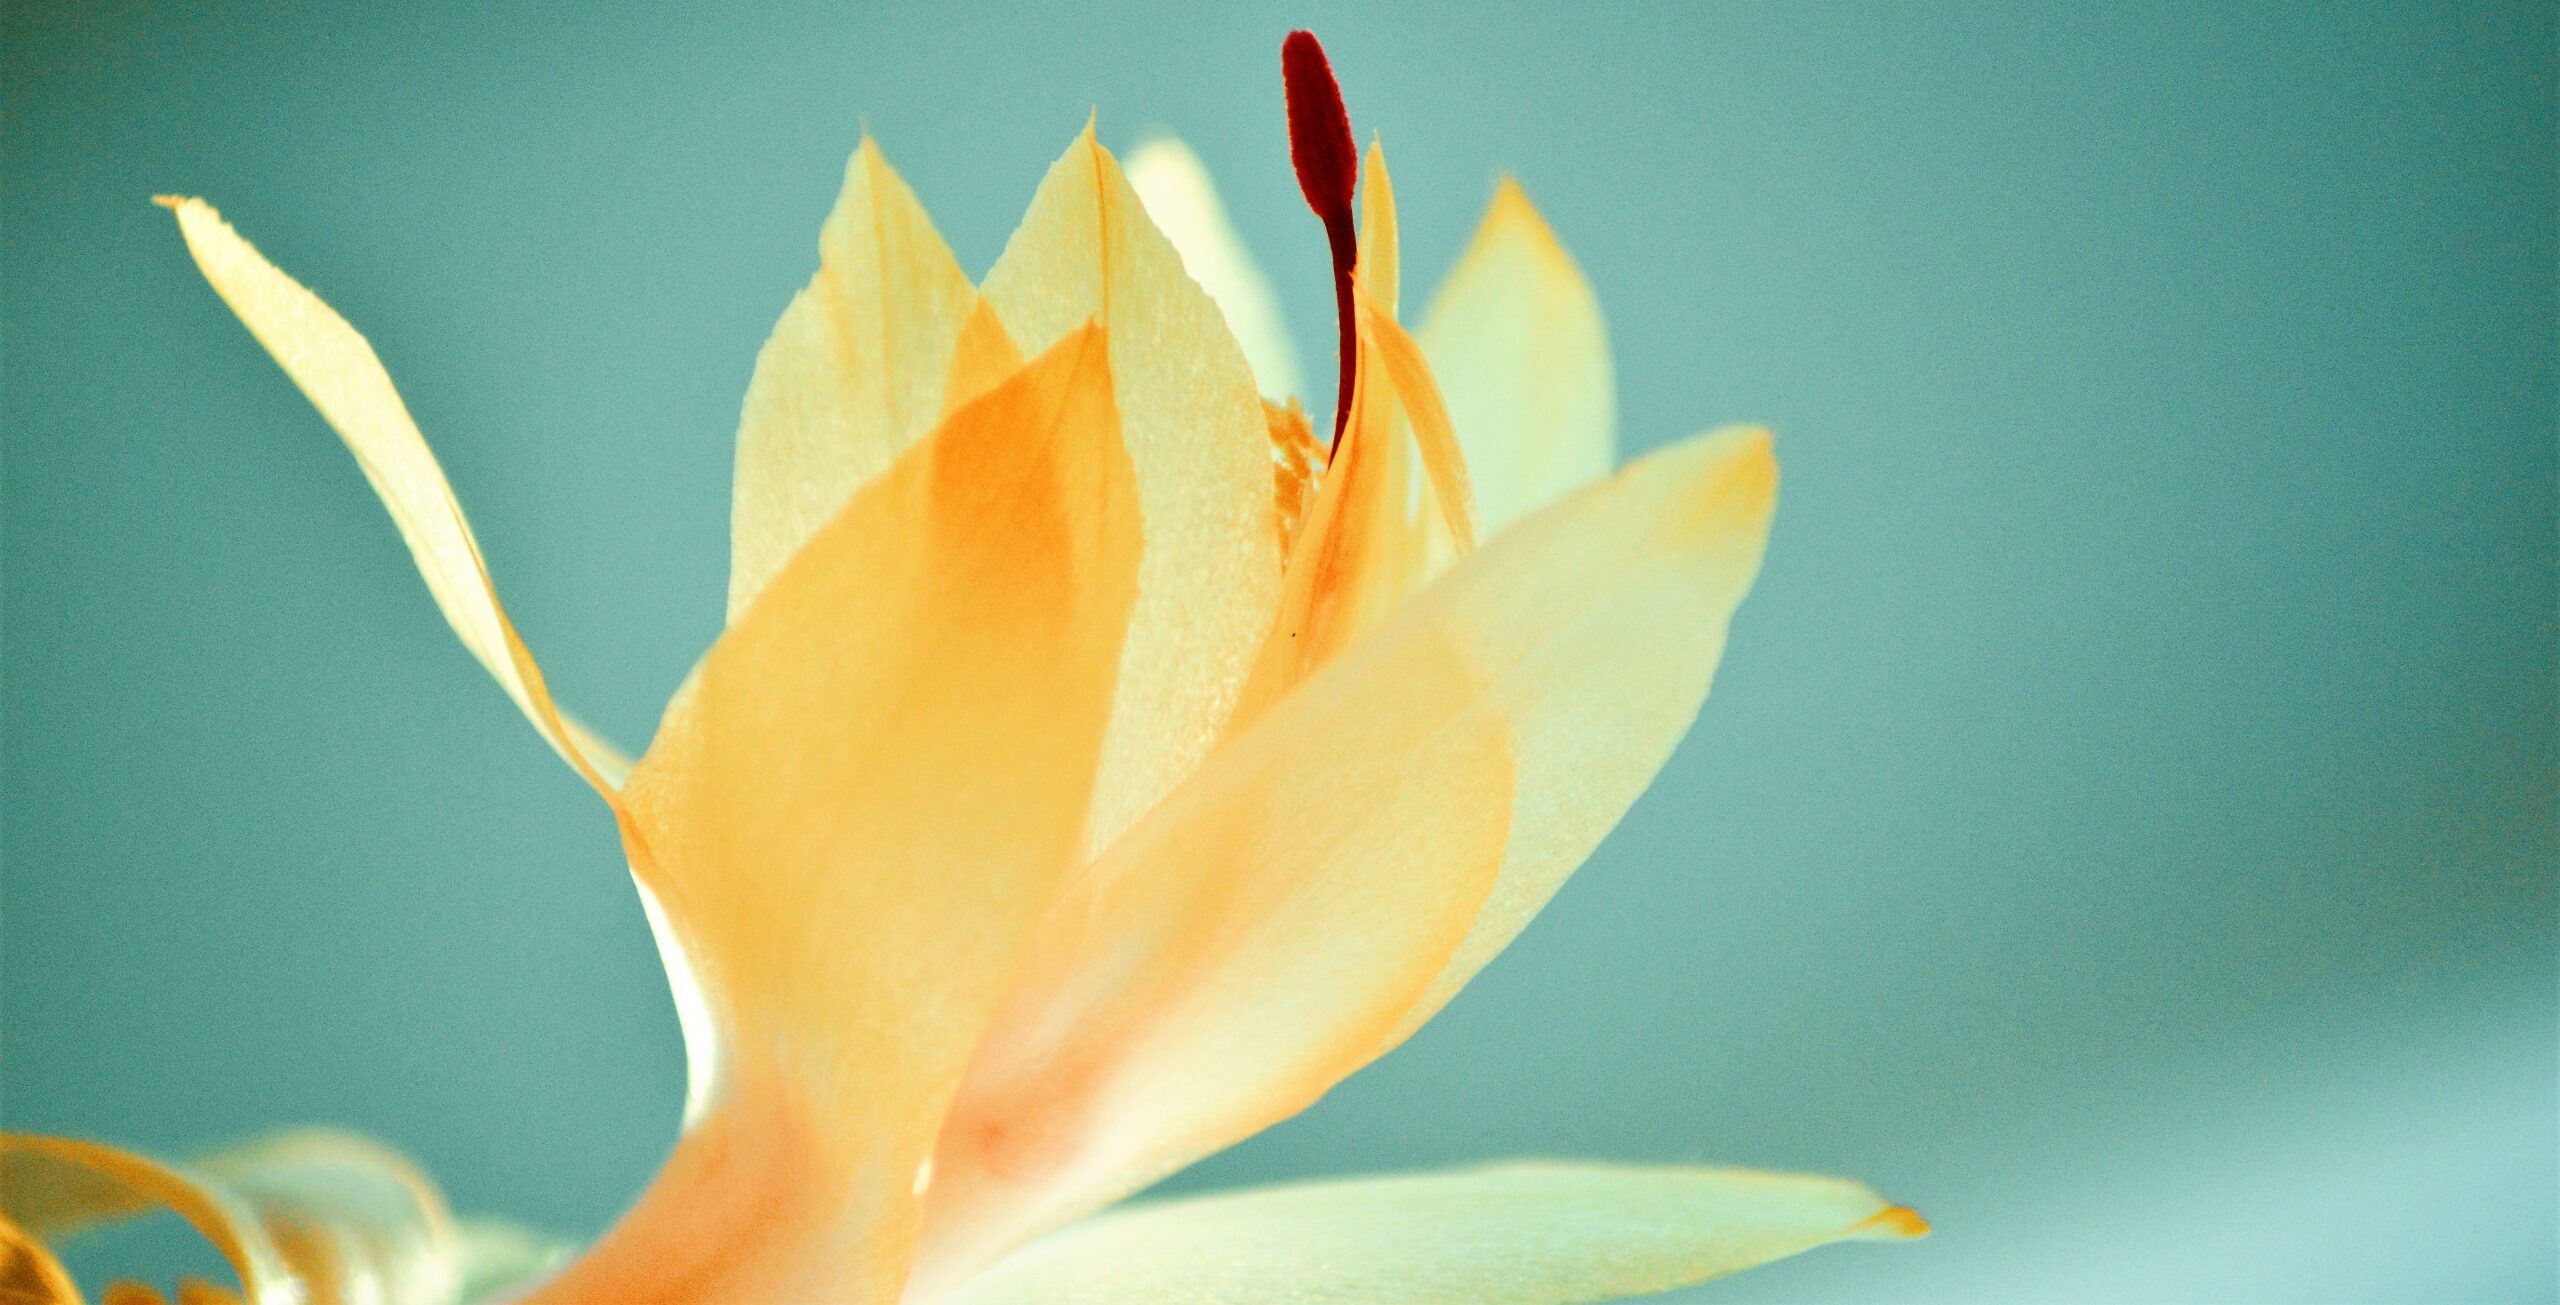 A yellow flower is soaring on a deep blue sky background.